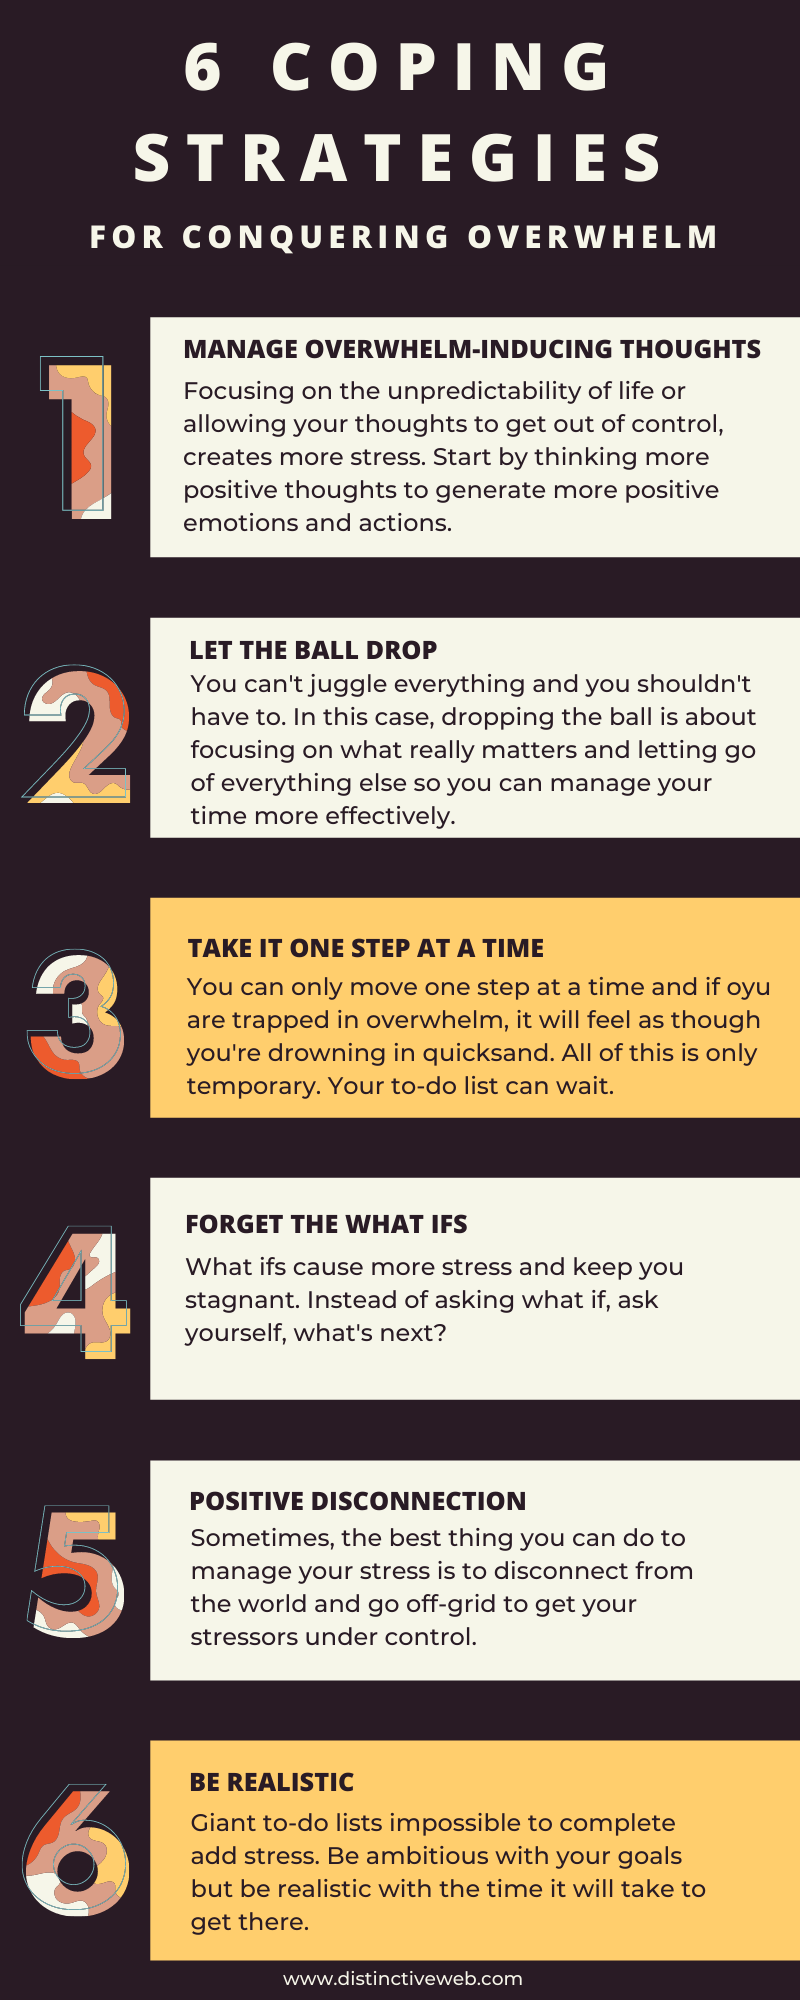 6 Coping Strategies for Overwhelm Infographic